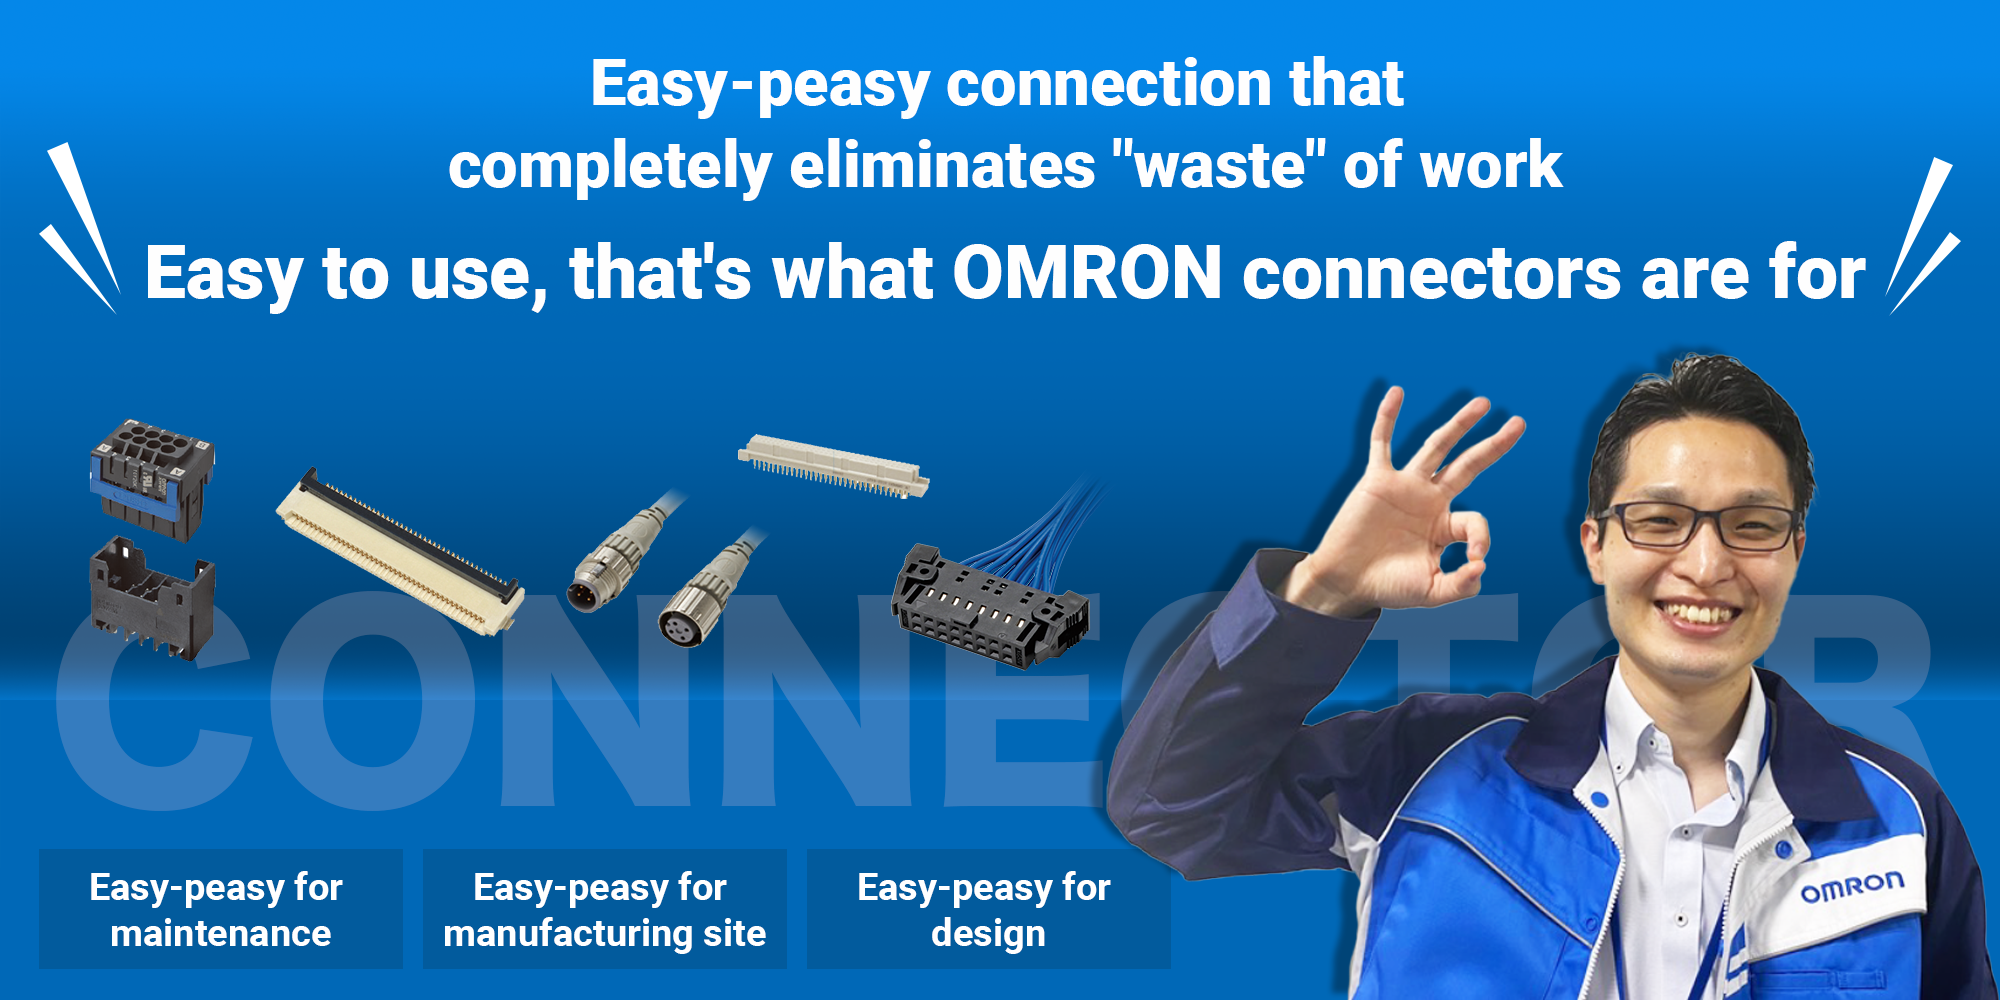 Easy-peasy connection that completely eliminates "waste" of work. Easy to use, that's what OMRON connectors are for.［Easy-peasy for maintenance］［Easy-peasy for manufacturing site］［Easy-peasy for design］